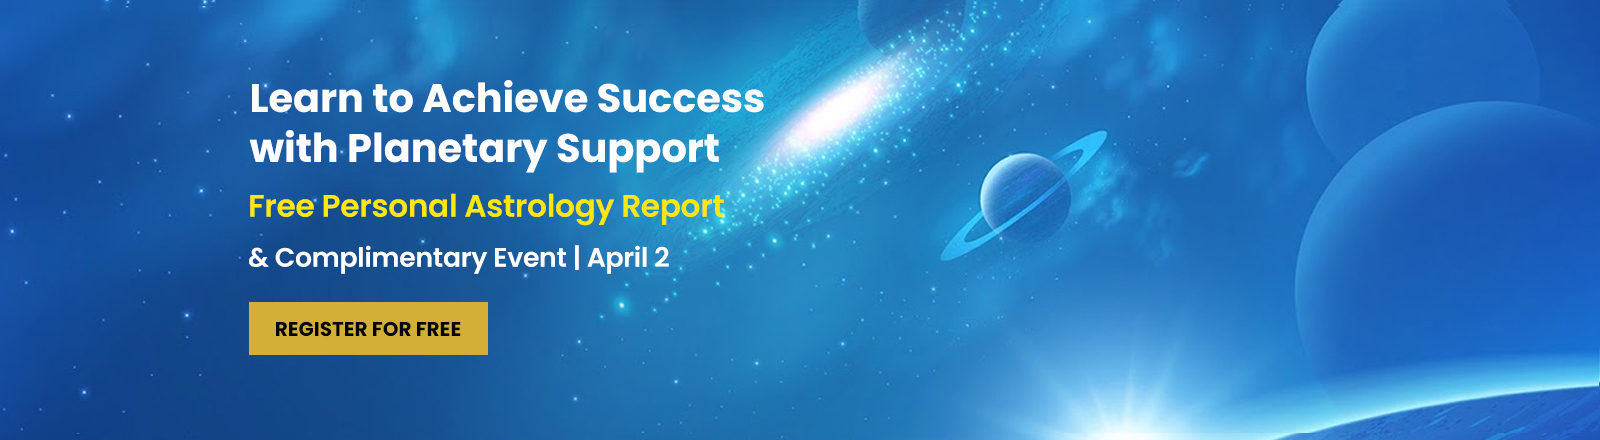 Learn to Achieve Success with Planetary Support